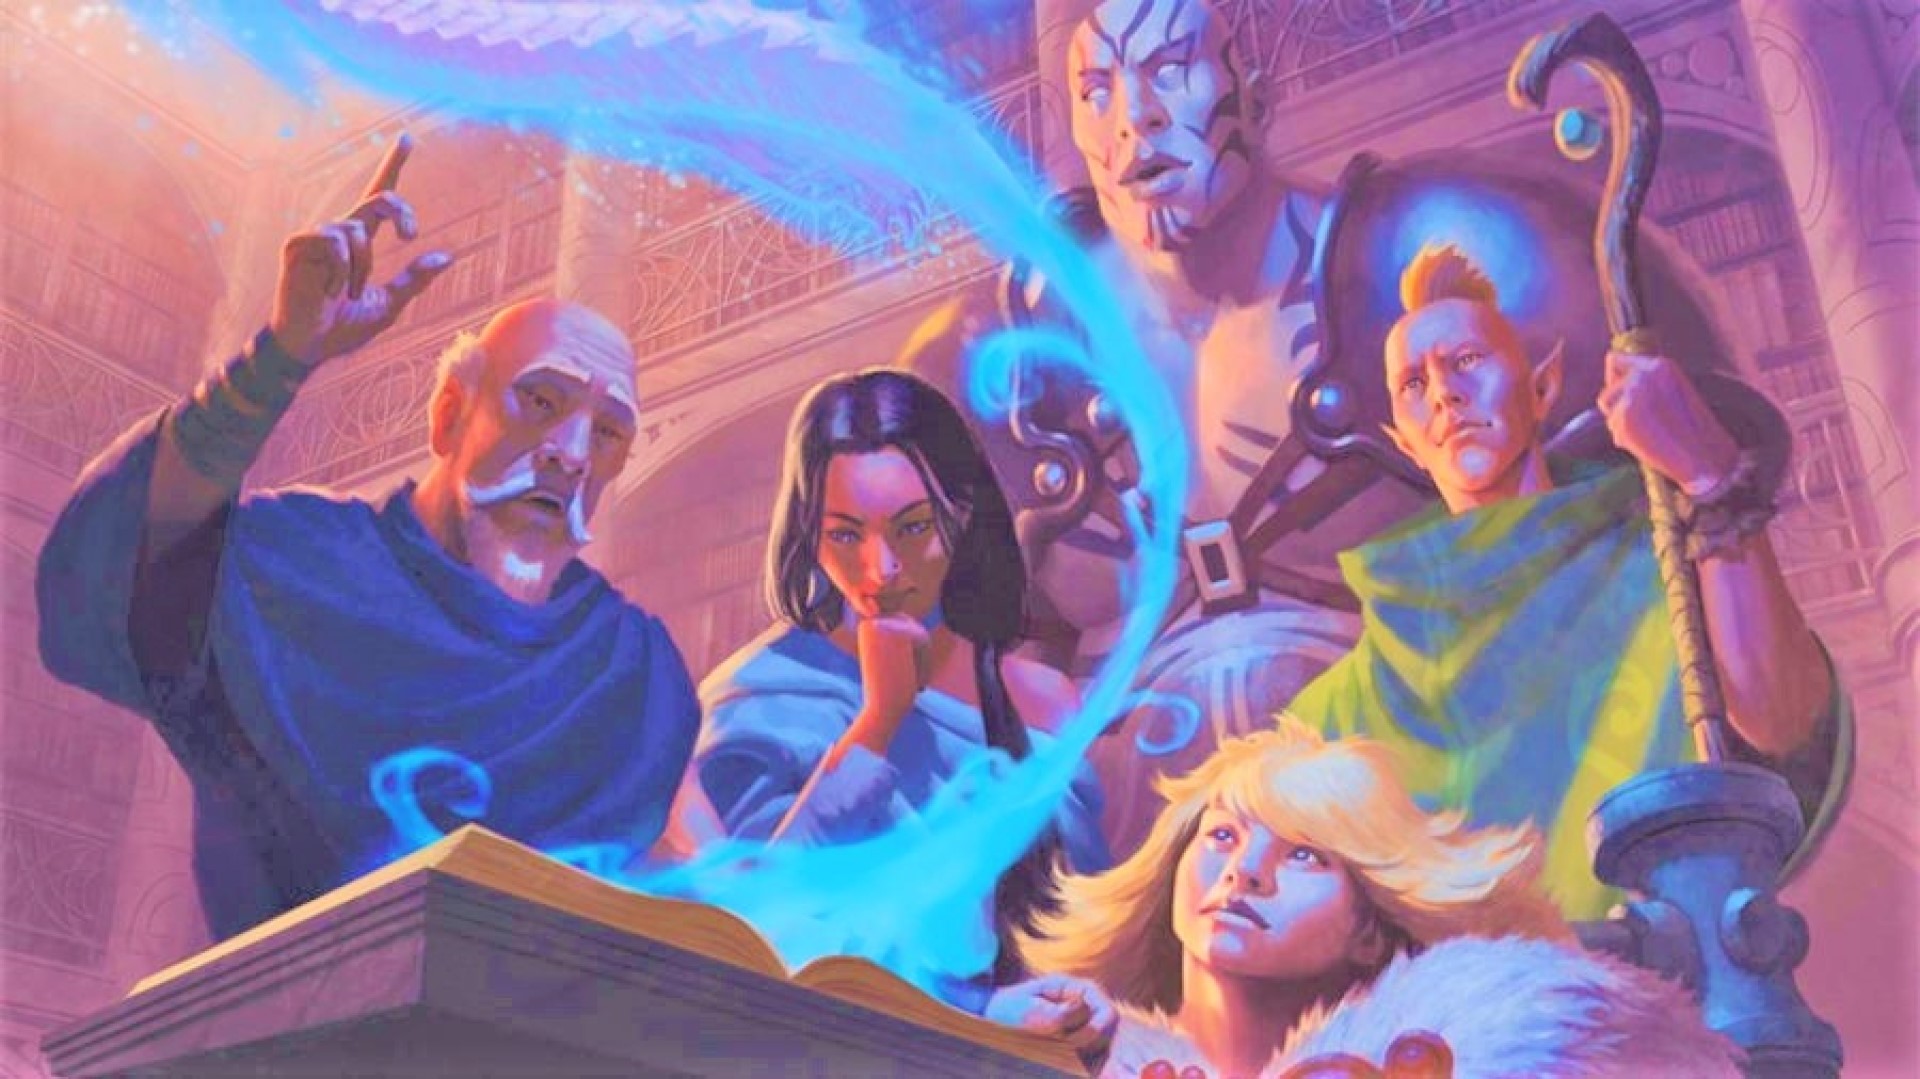 D&D Races Vs Species Controversy: What To Know About 5e Removing Races